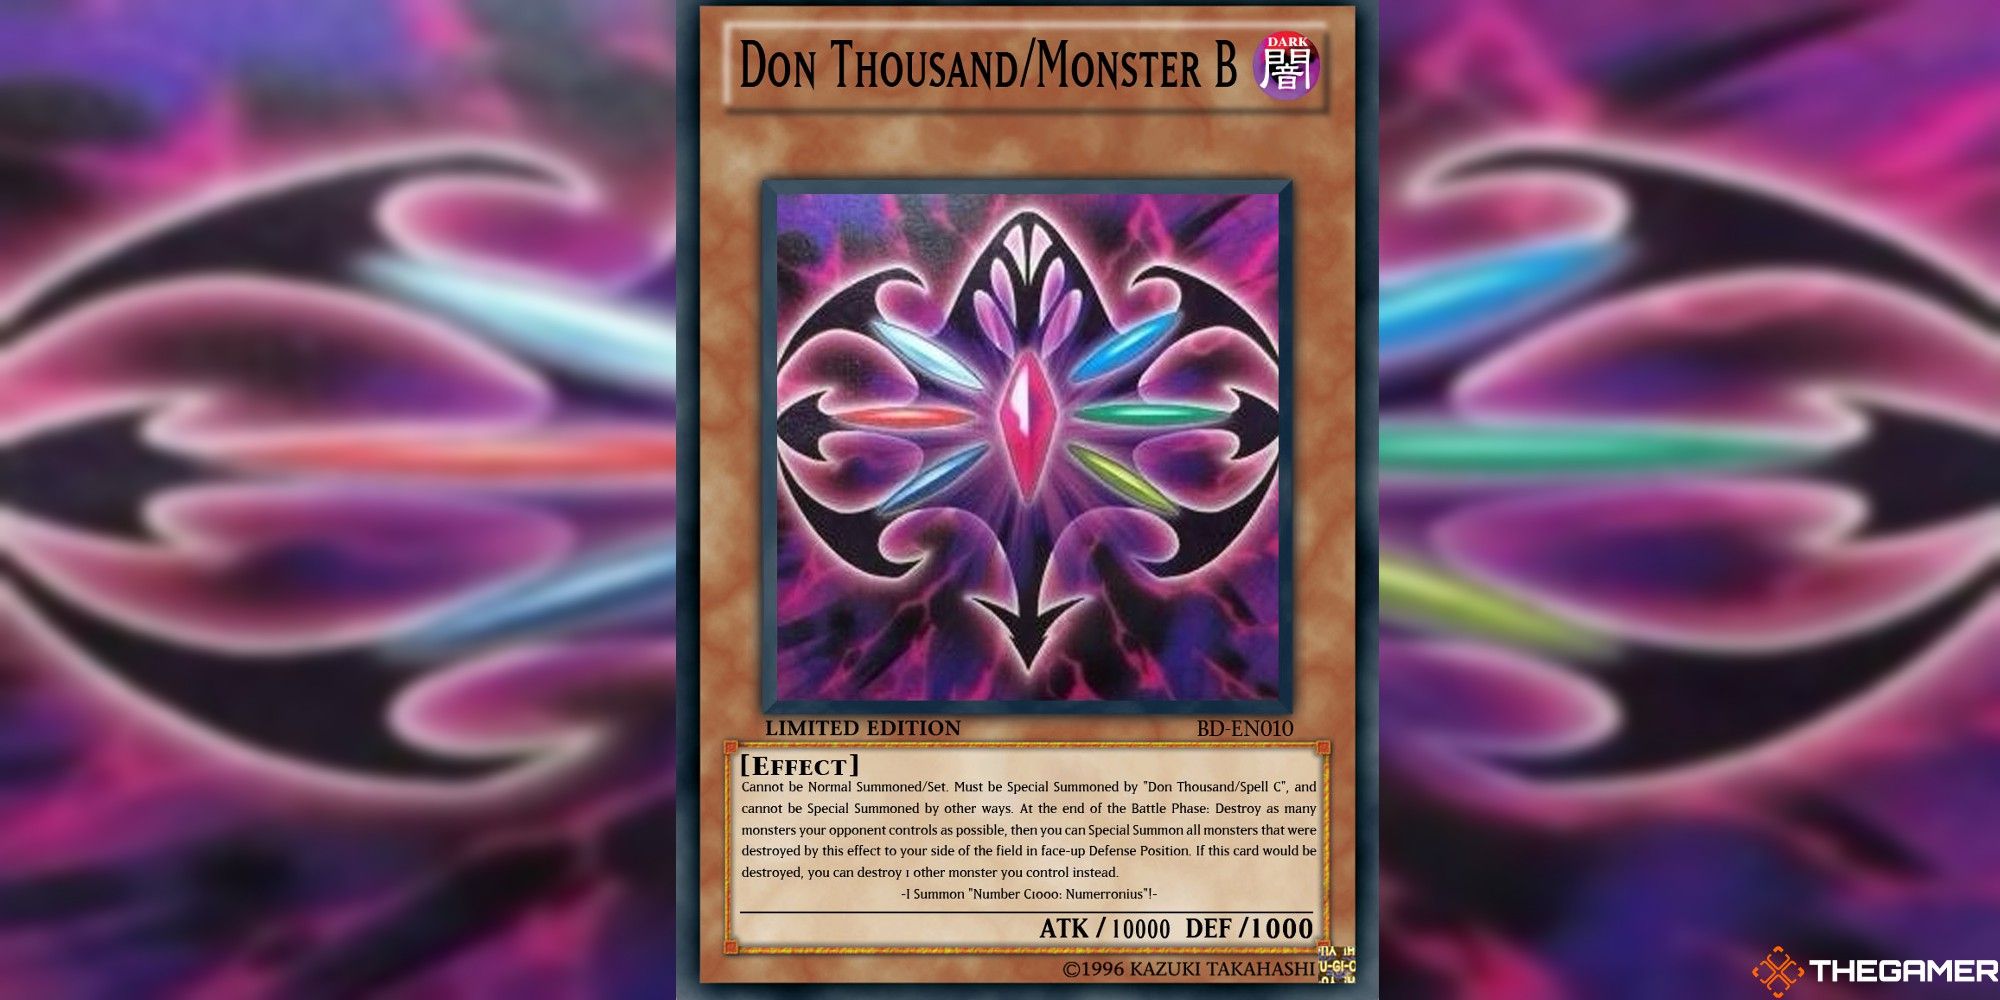 yugioh don thousand monster b full card and art background